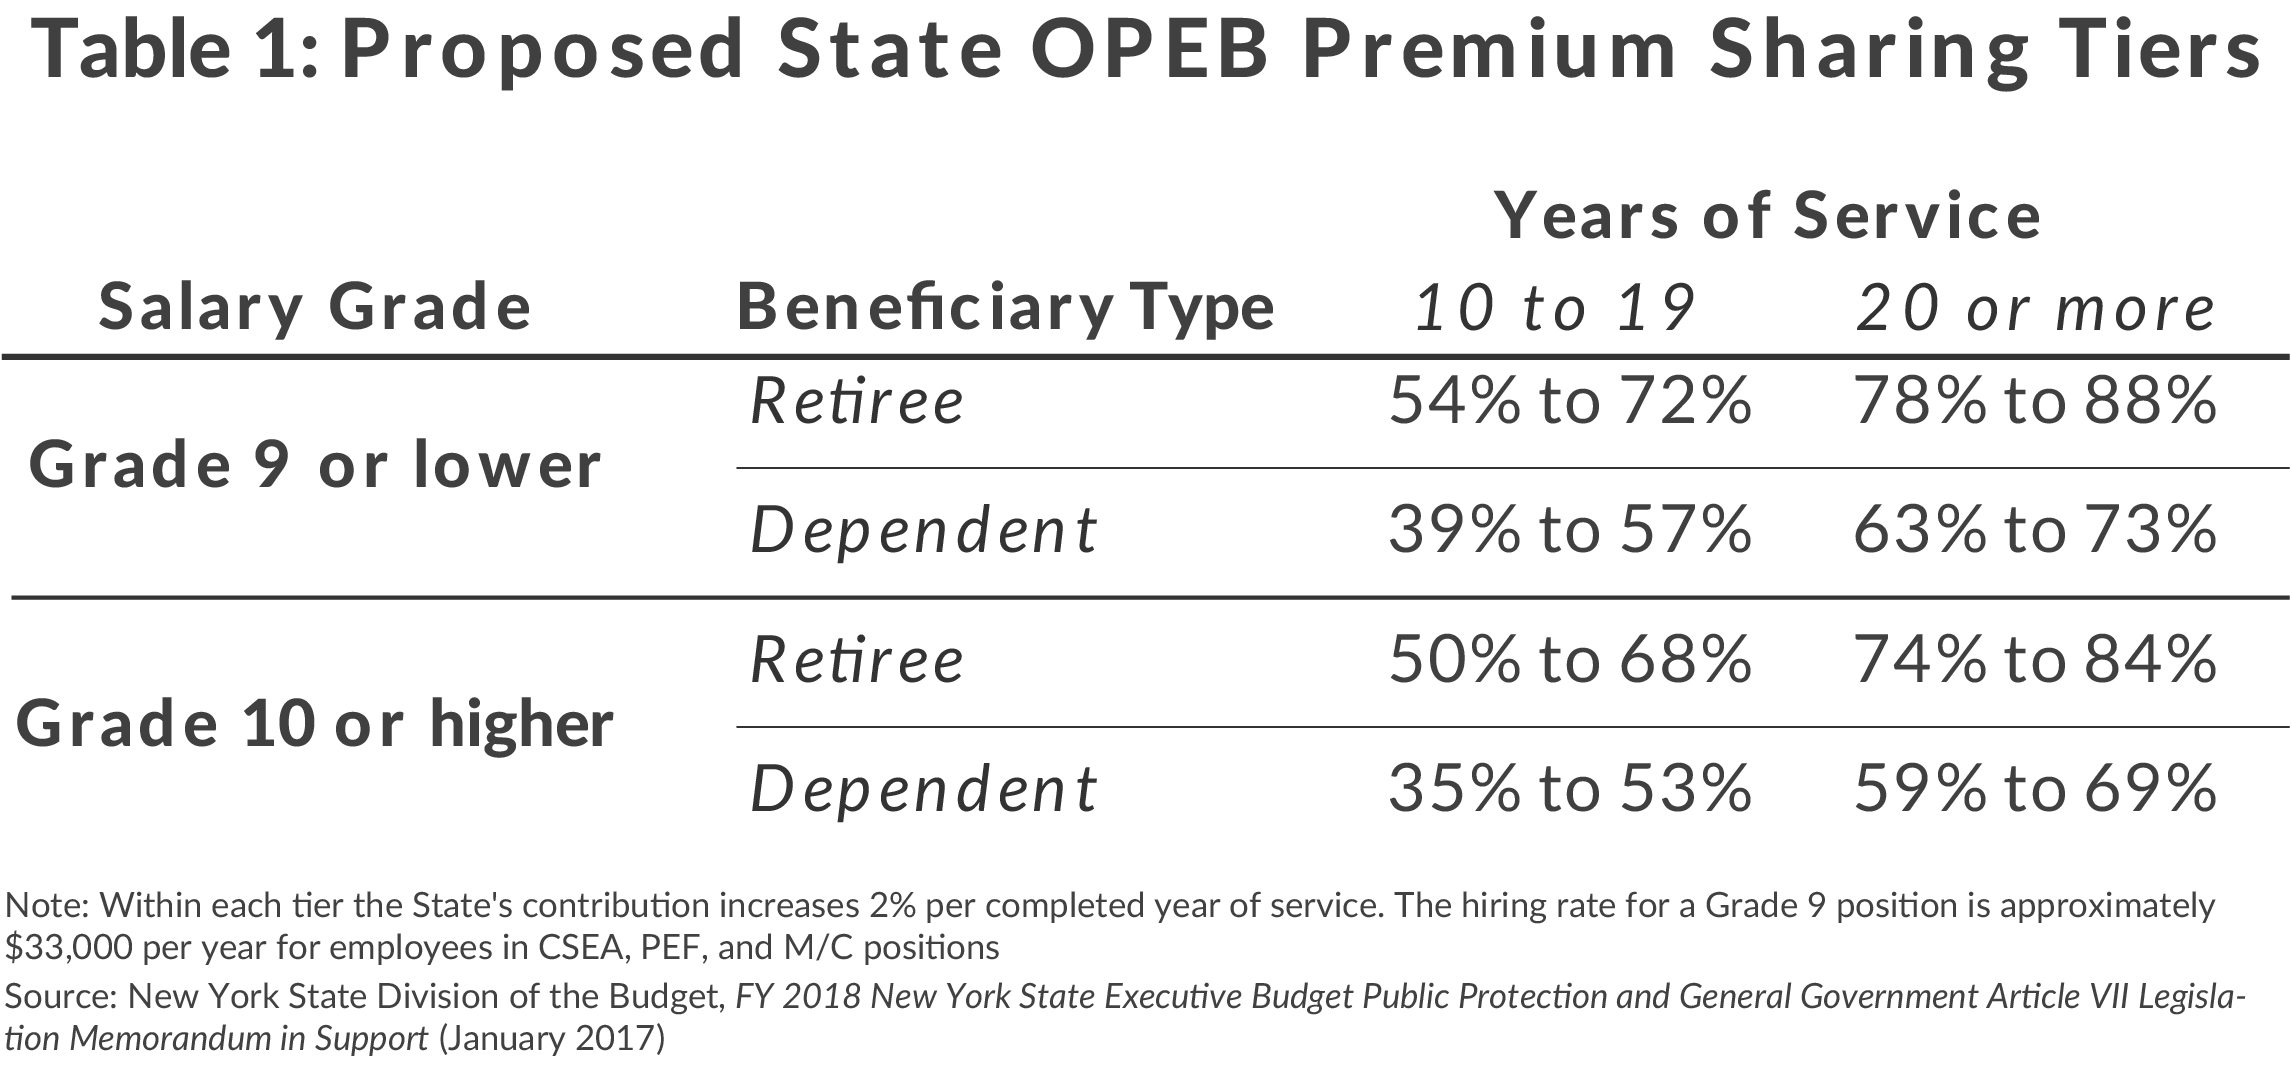 Table 1: Proposed State OPEB Premium Sharing Tiers